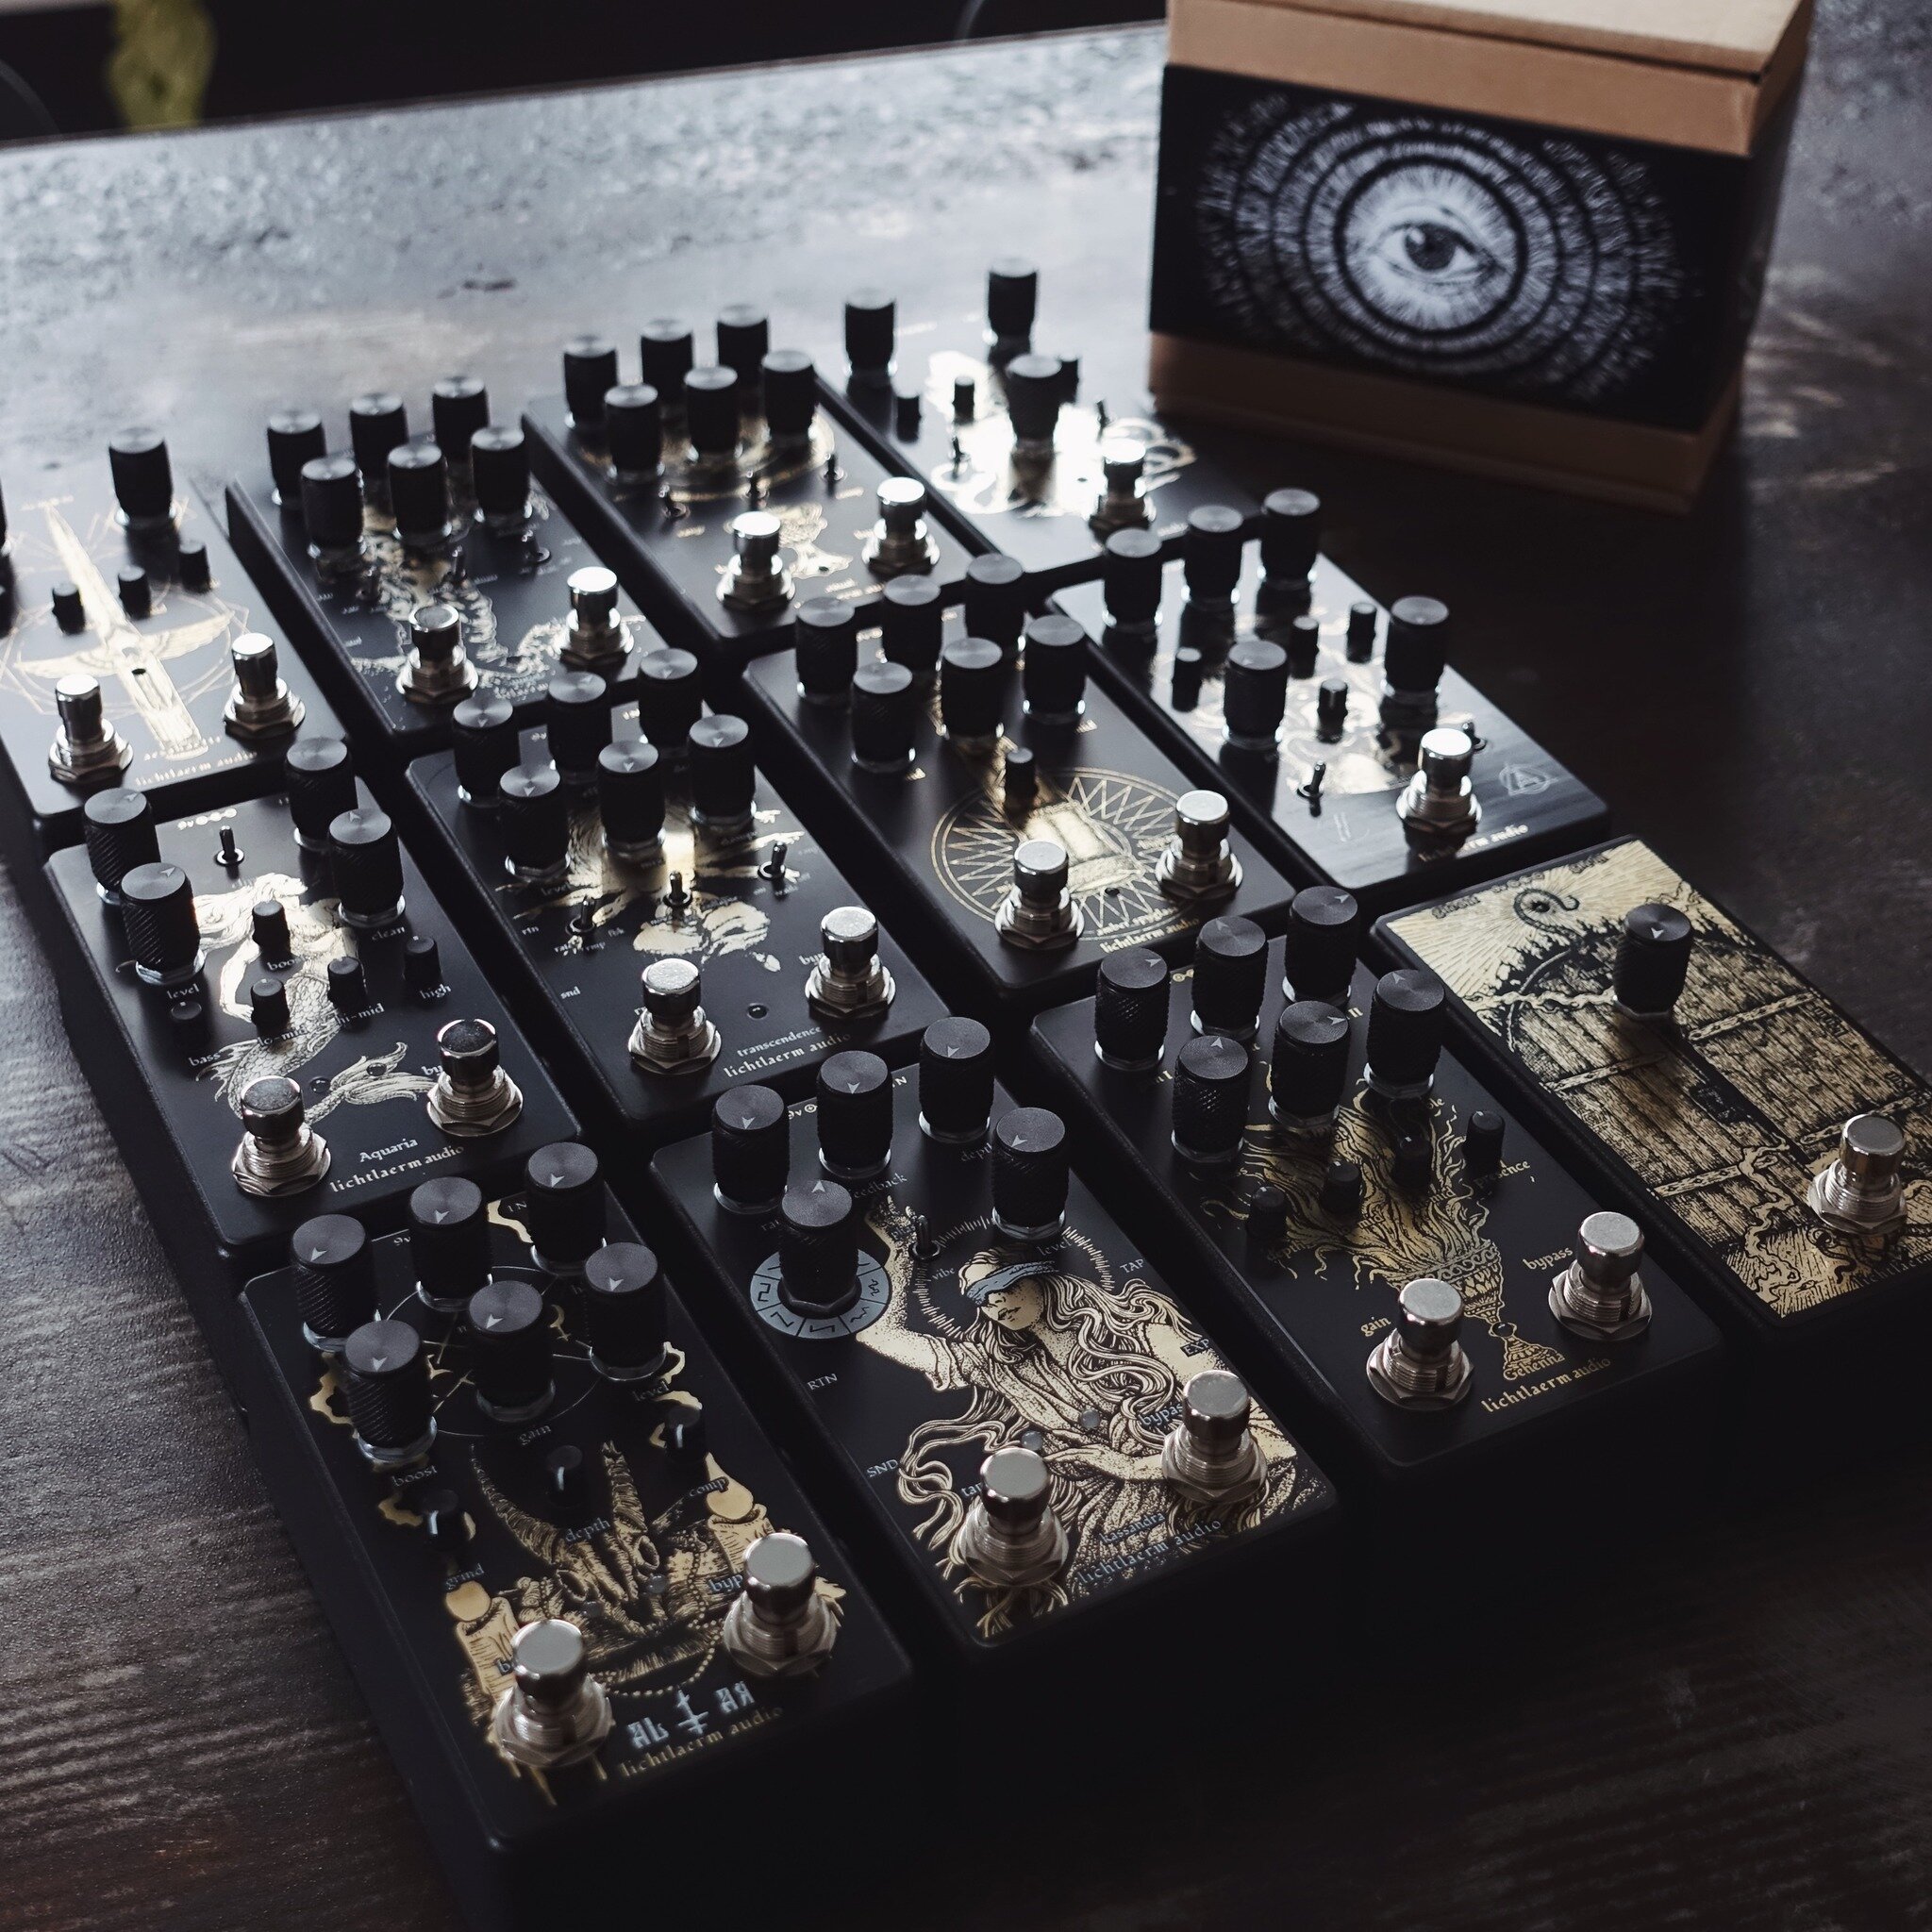 It's official! Cult FX is now a North American @lichtlaermaudio dealer.

That means we carry ALL of their pedals now. It also means no more international shipping rates to get your hands on these coveted sonic doom devices.

Always wanted a Medusa, G